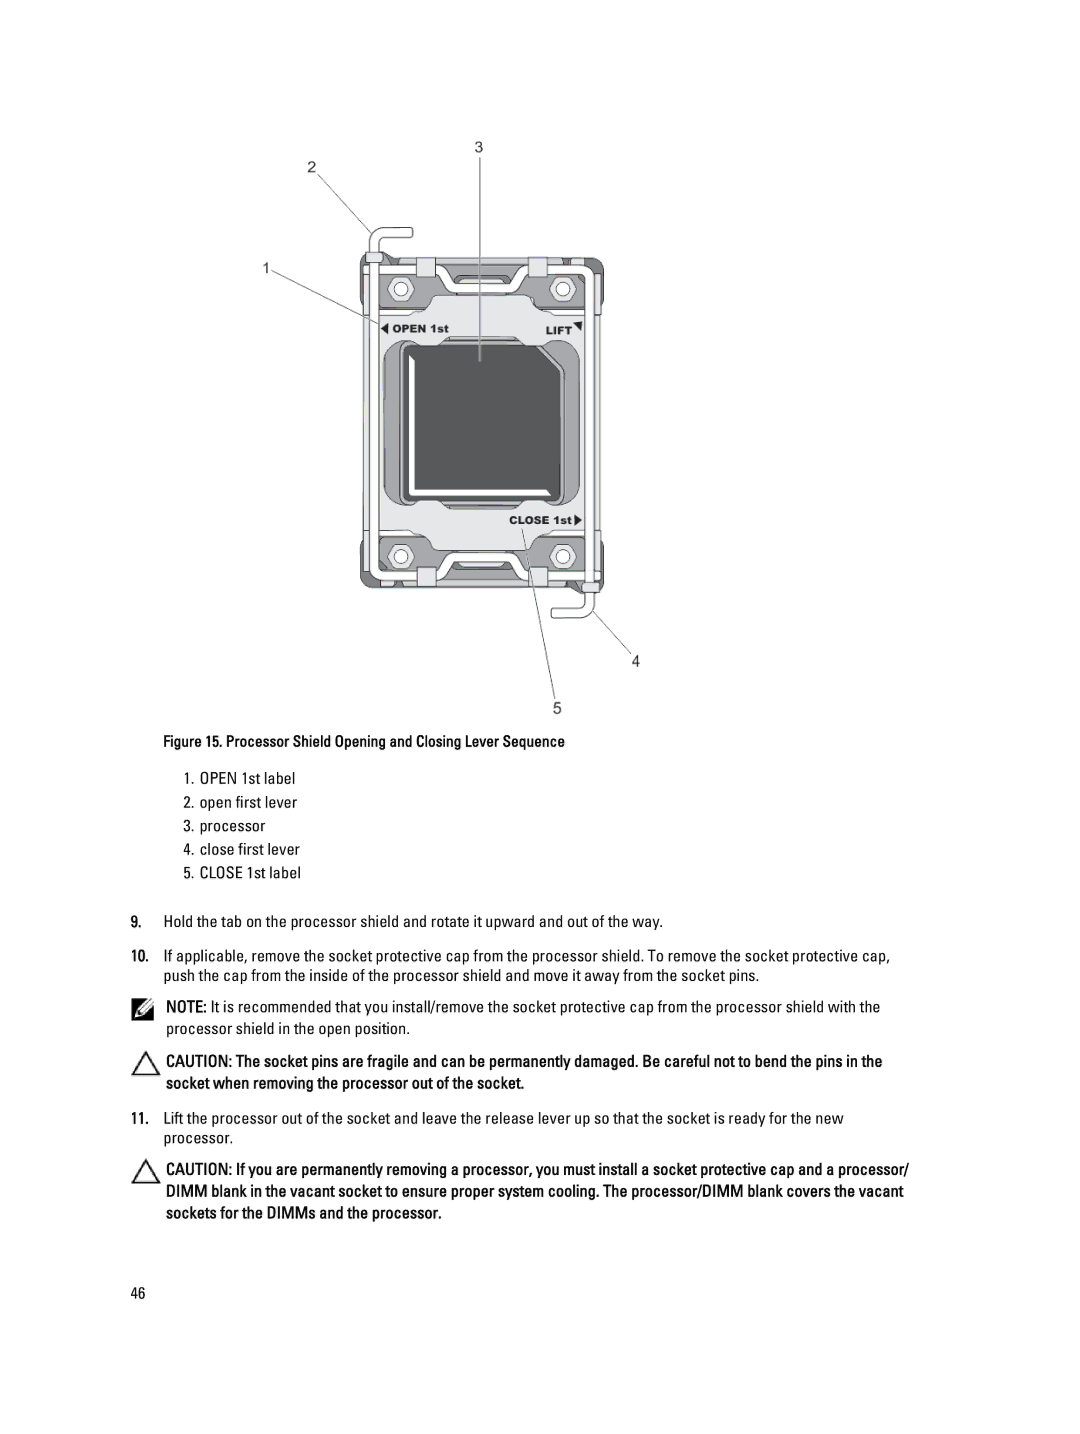 Dell M620 owner manual Processor Shield Opening and Closing Lever Sequence 